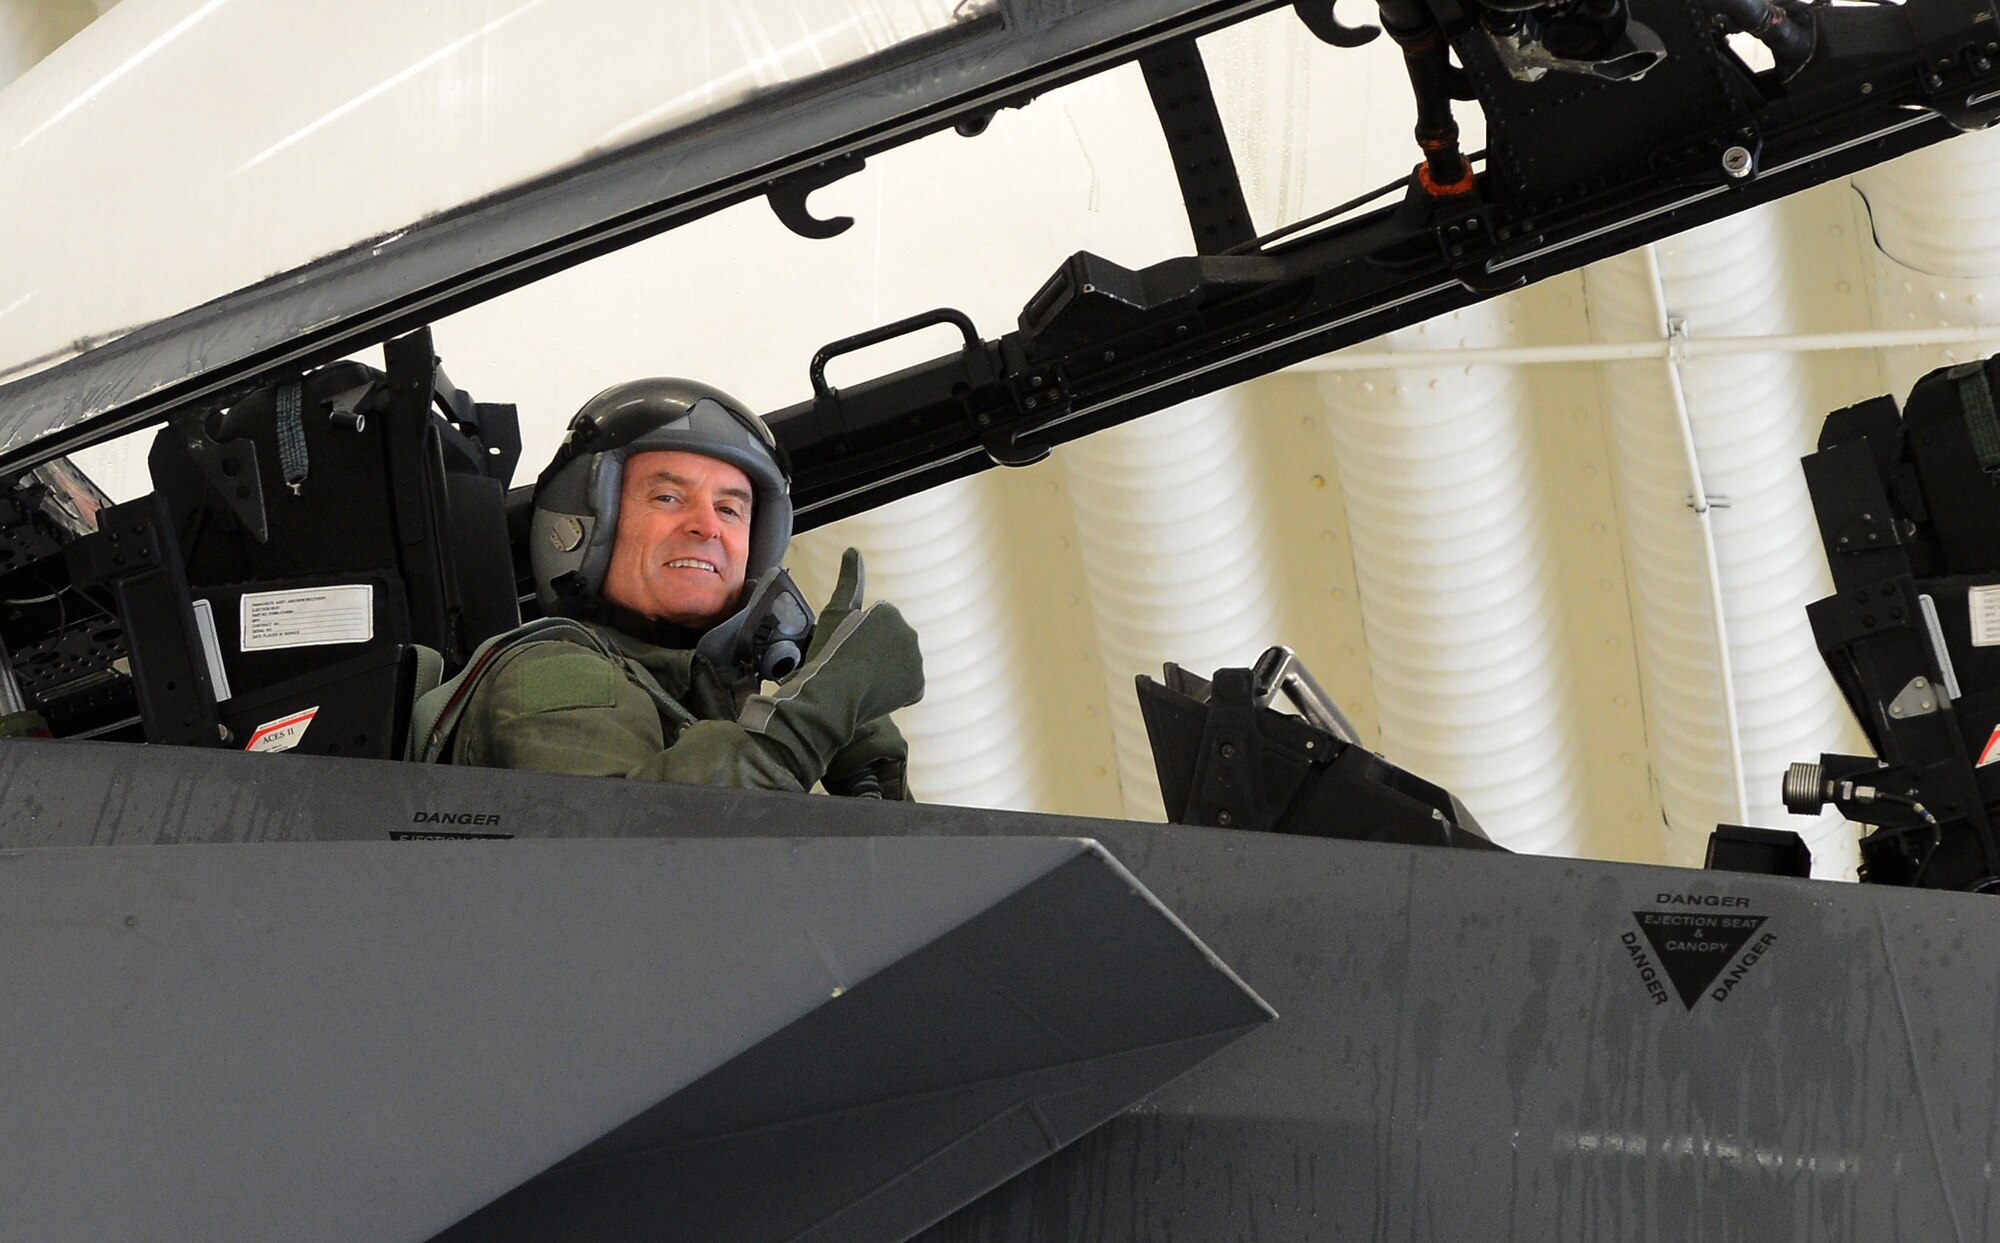 U.S. Air Force Lt. Gen. Darryl Roberson, 3rd Air Force and 17th Expeditionary Air Force commander, gives a thumbs up before taking off in a F-15E Strike Eagle fighter aircraft at Spangdahlem Air Base, Germany, Dec. 18, 2014. Roberson participated in Iron Hand 15-2 to gain first-hand knowledge of the training exercise. (U.S. Air Force photo by Airman 1st Class Luke Kitterman/Released)